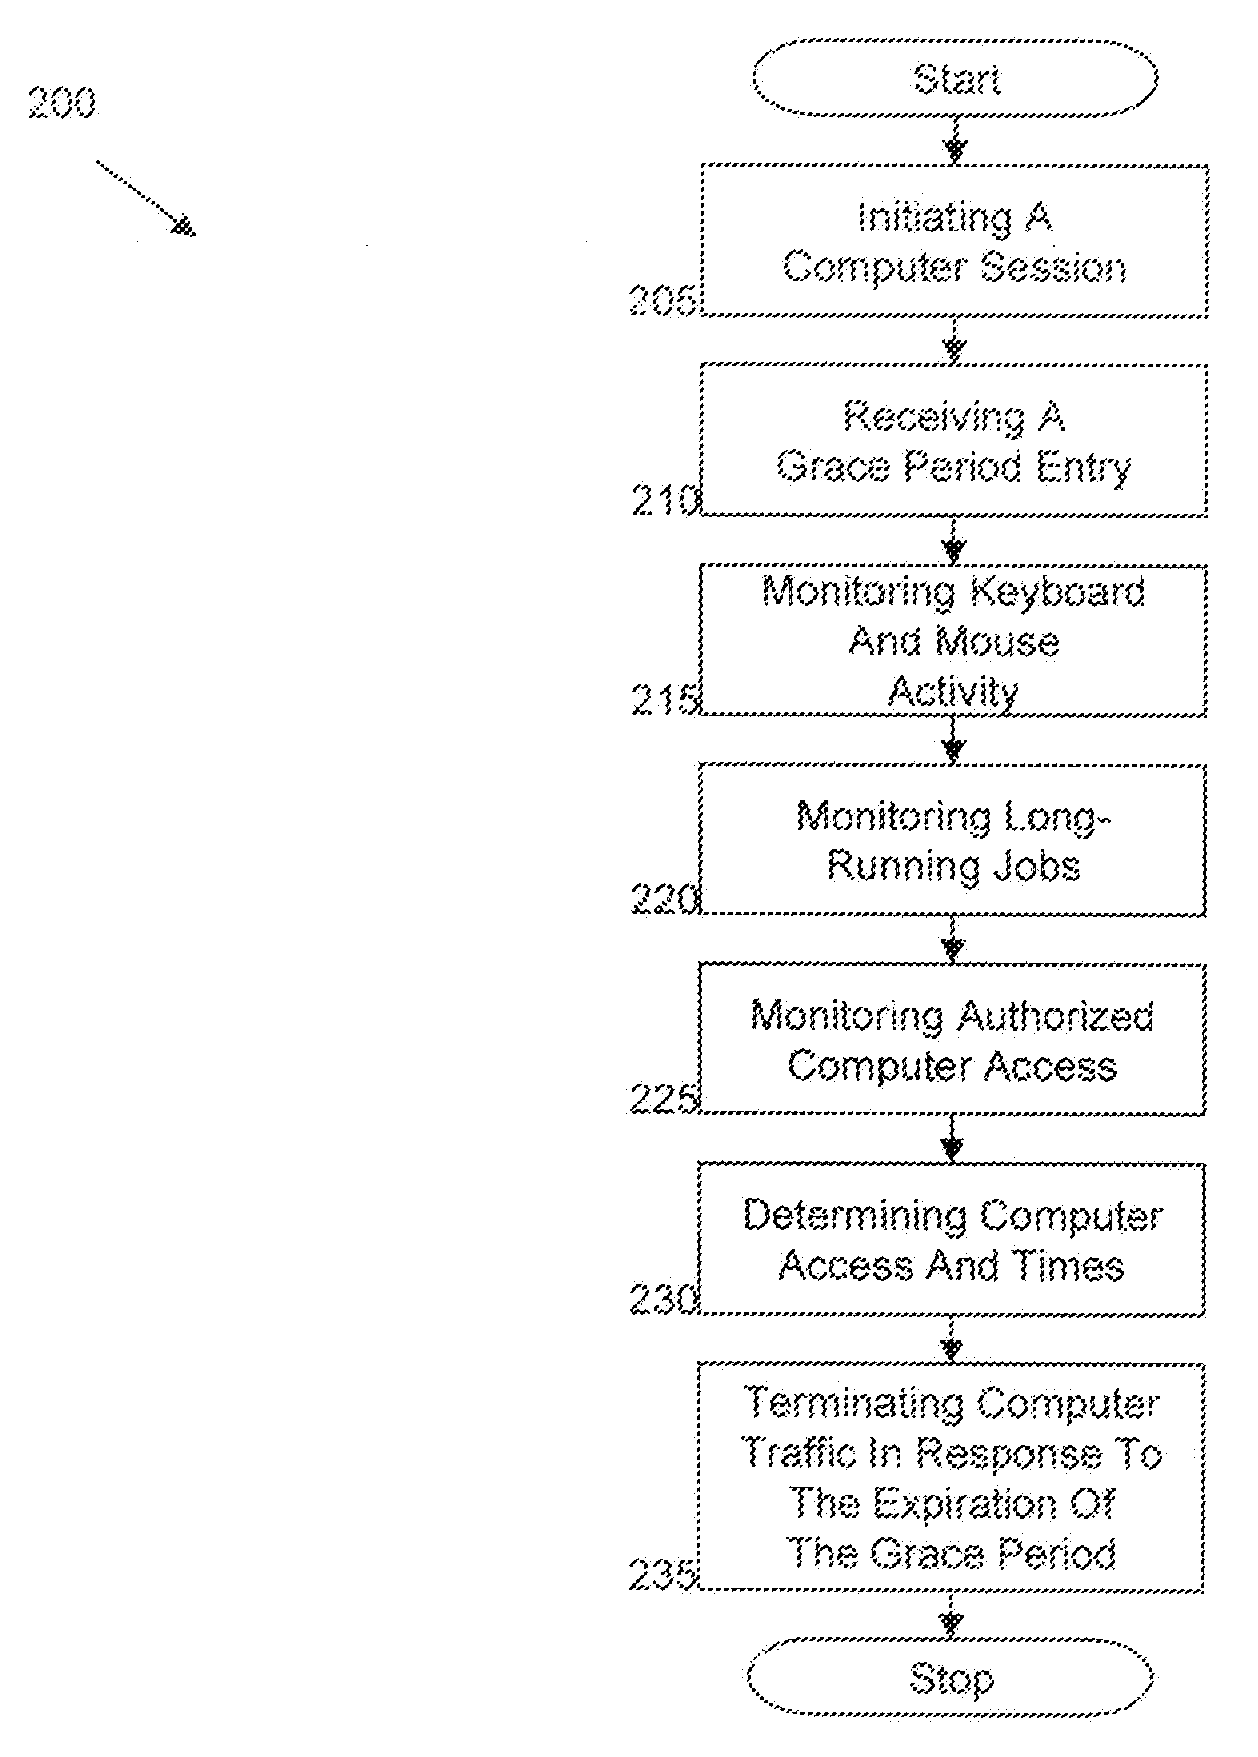 Systems, methods and computer products for a security framework to reduce on-line computer exposure